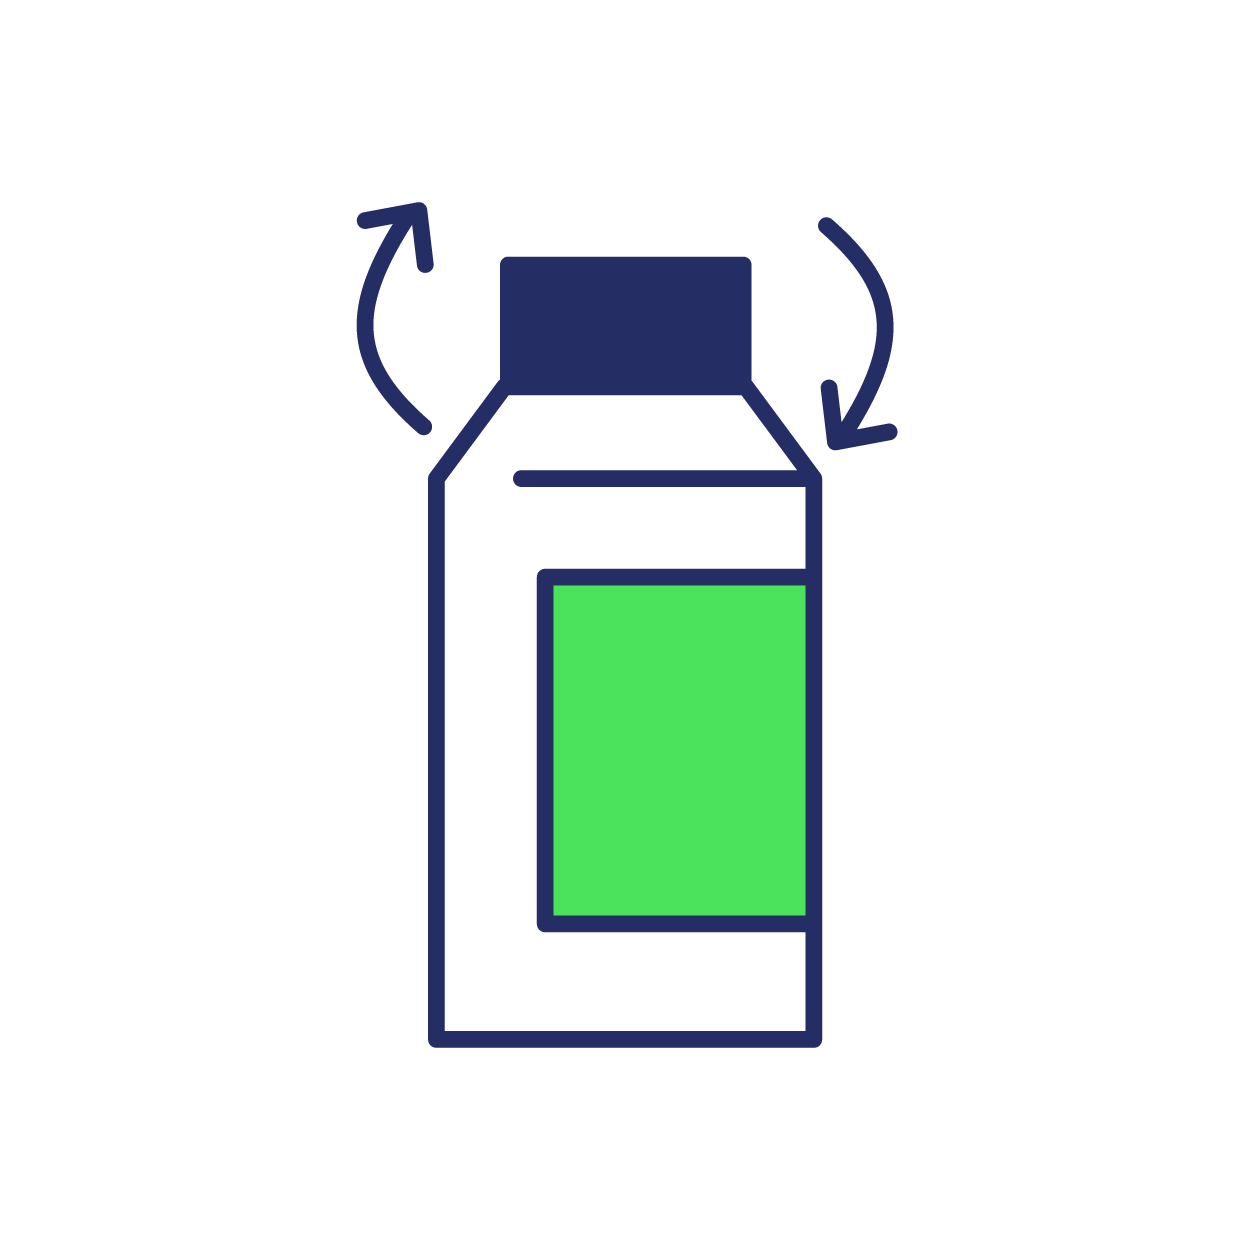 Icon of bottle packaging with arrows to indicate opening